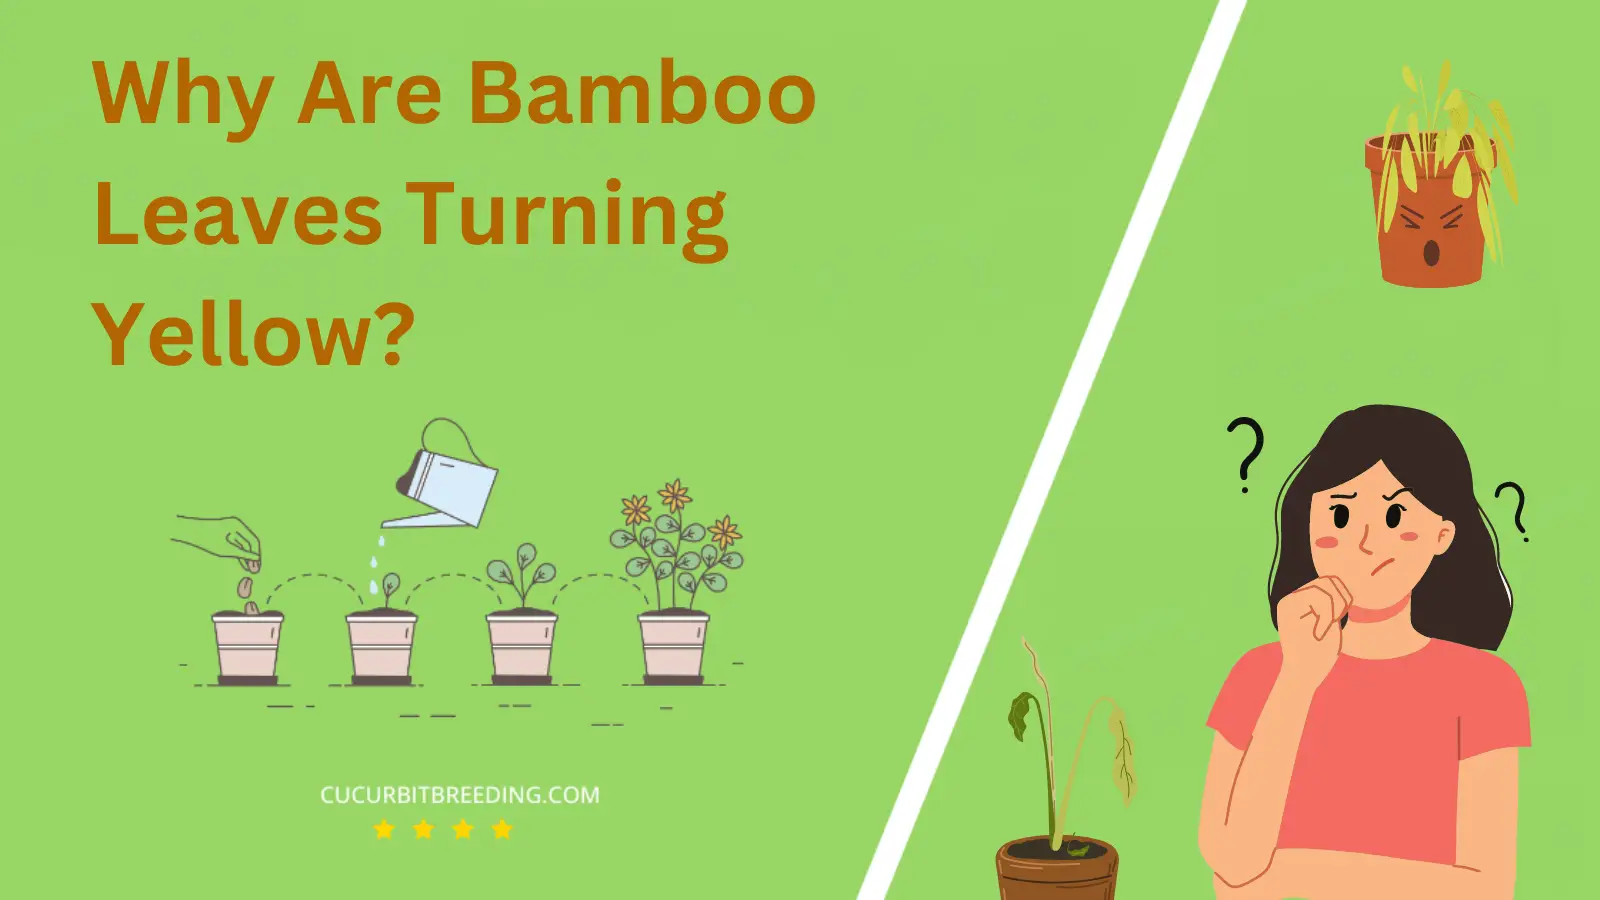 Why Are Bamboo Leaves Turning Yellow